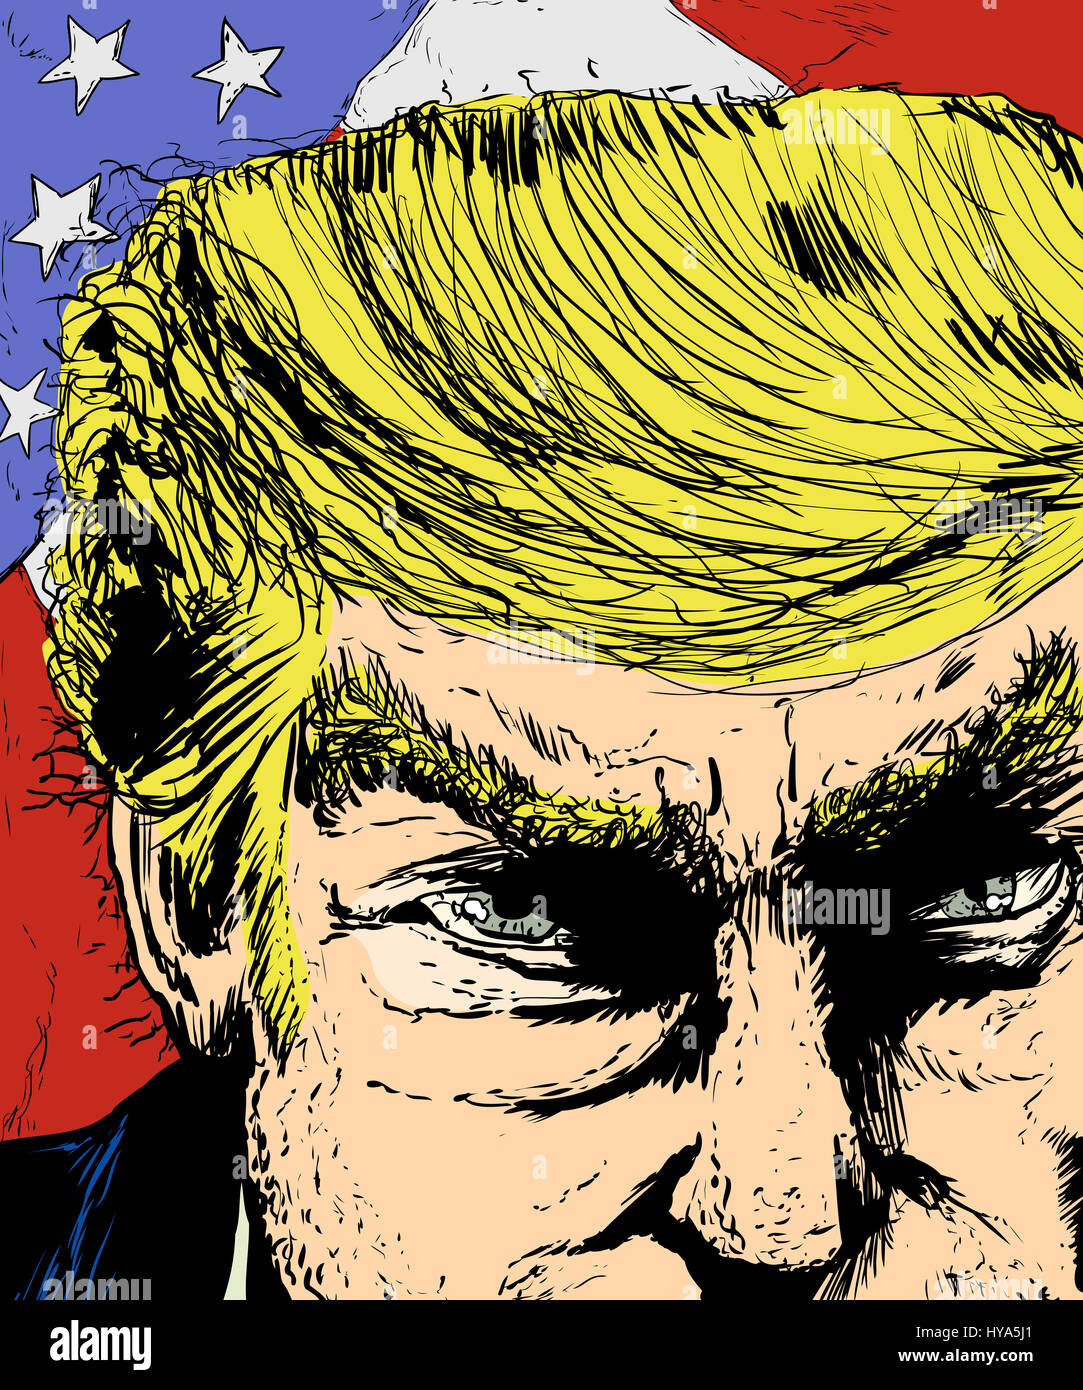 April 1, 2017. Close up sketch on face of Donald Trump with colorful American flag Stock Photo